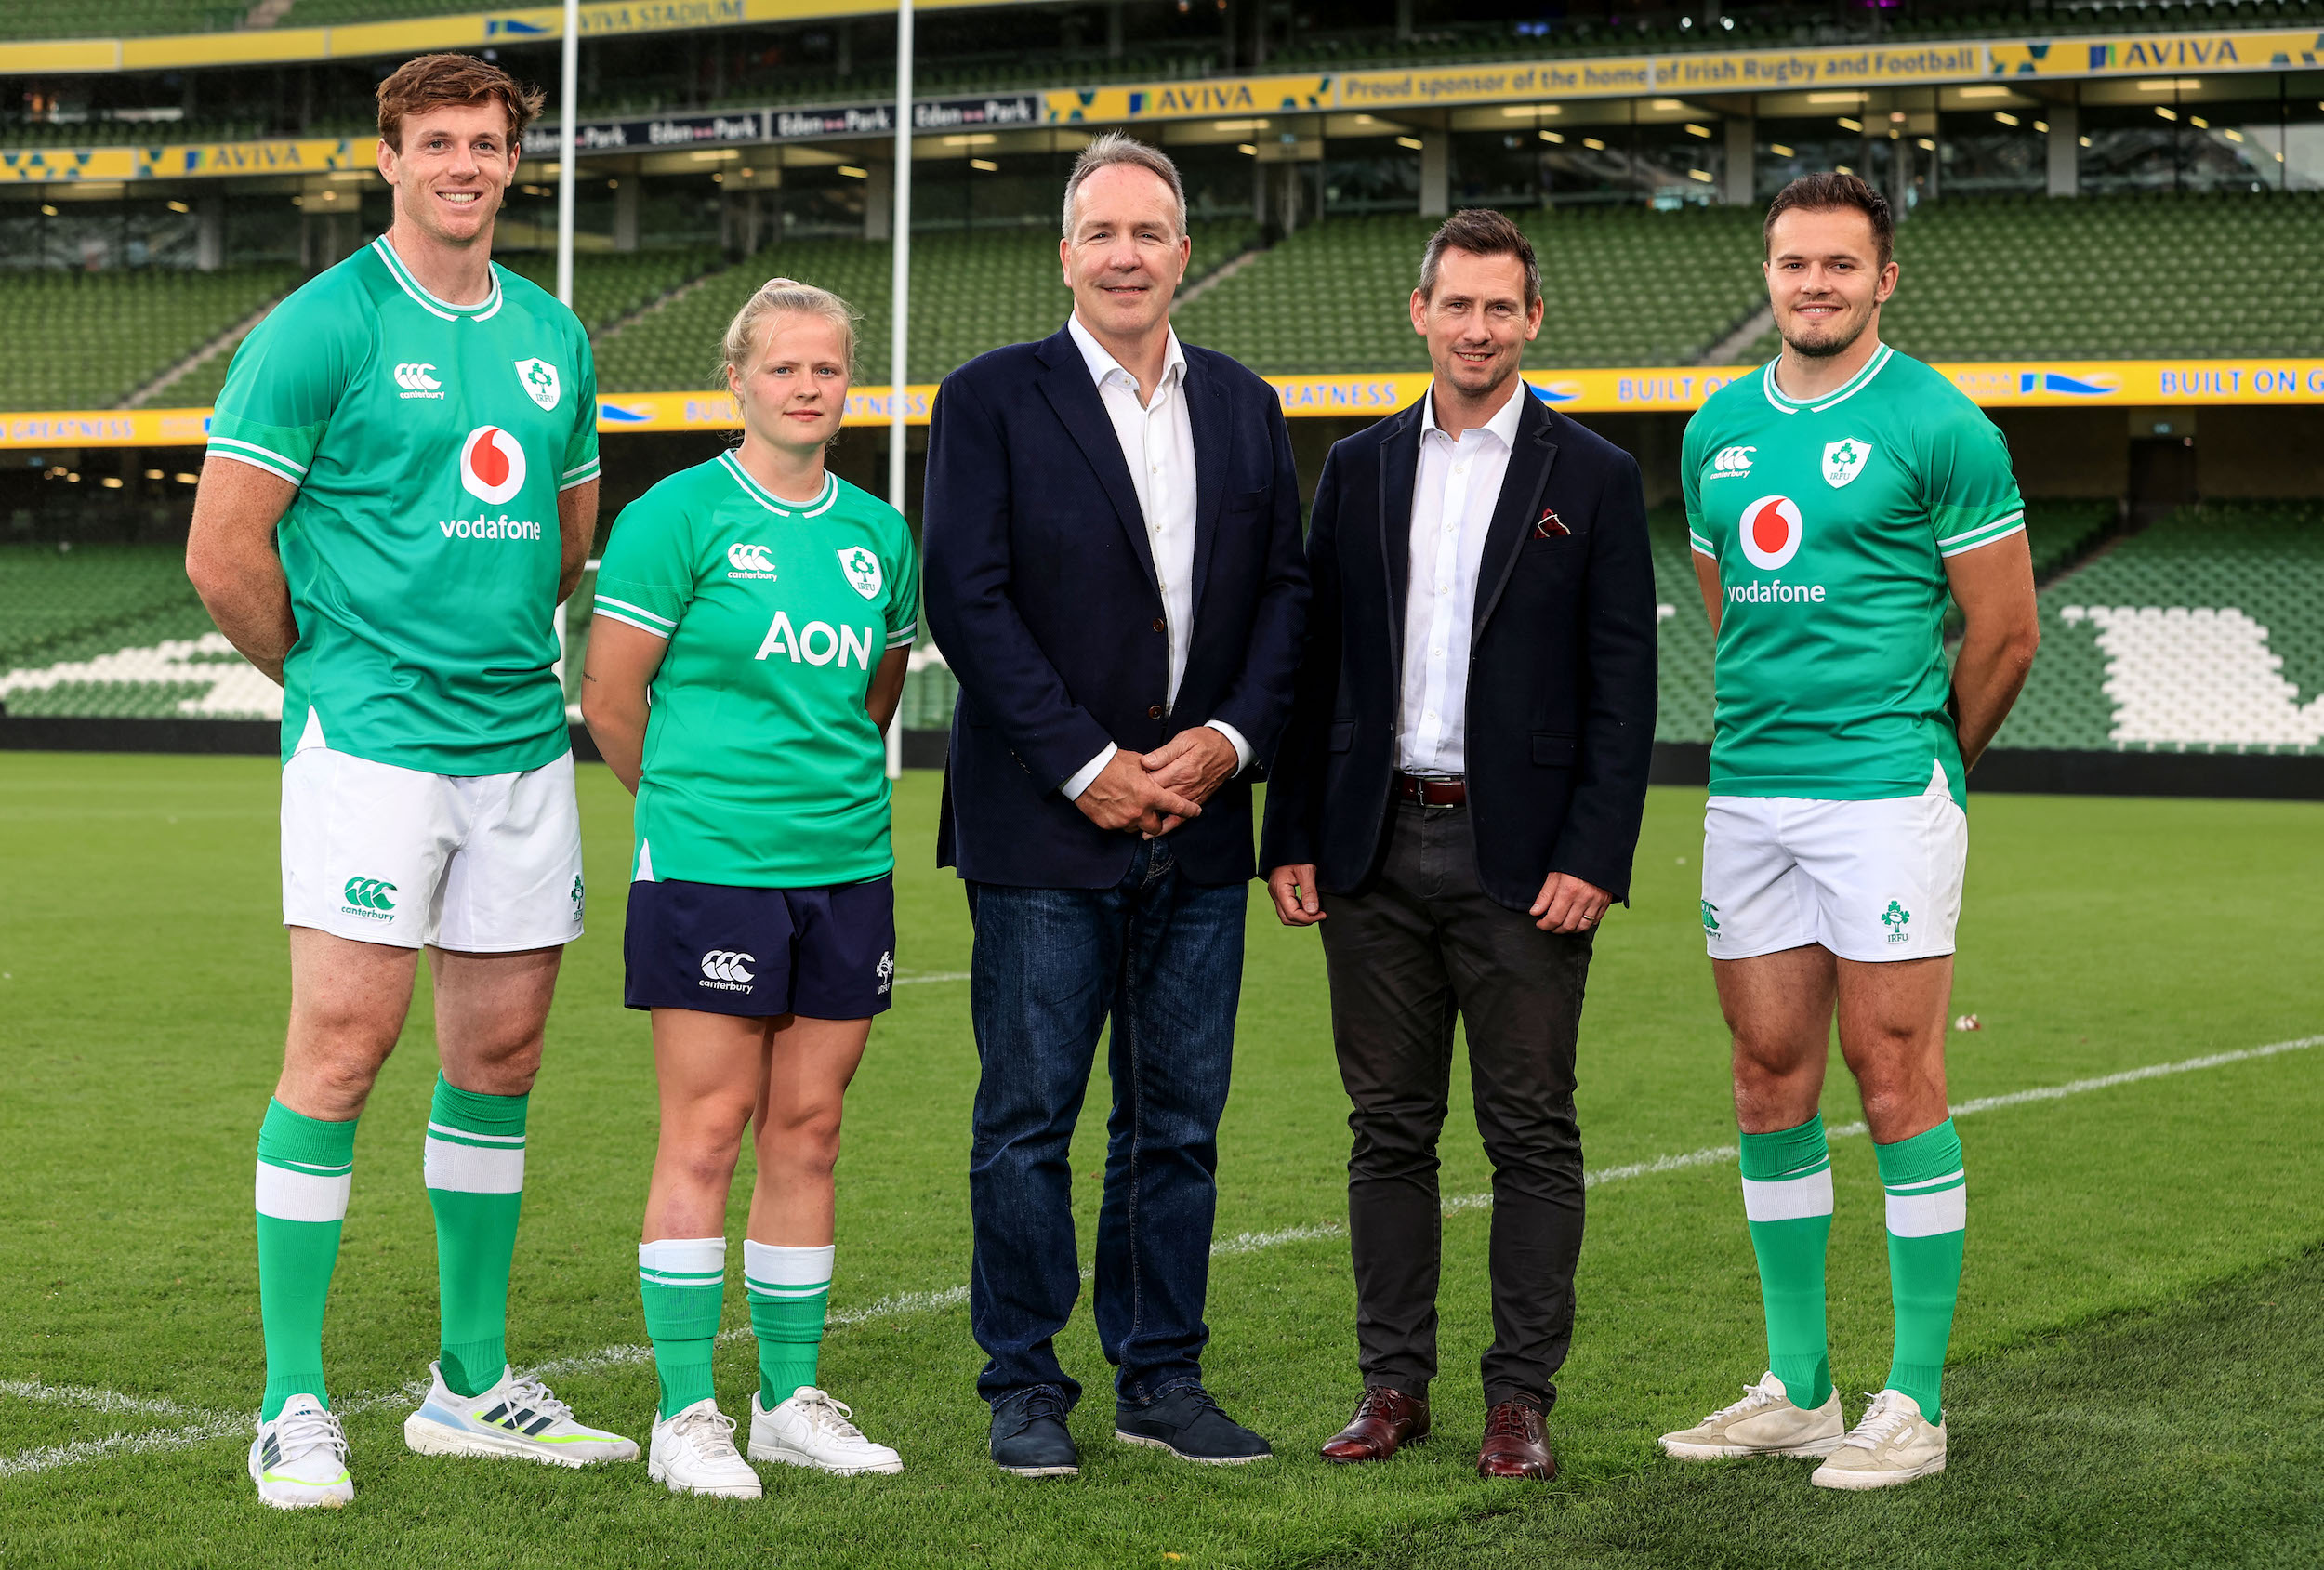 Canterbury signs new partnership with the IRFU